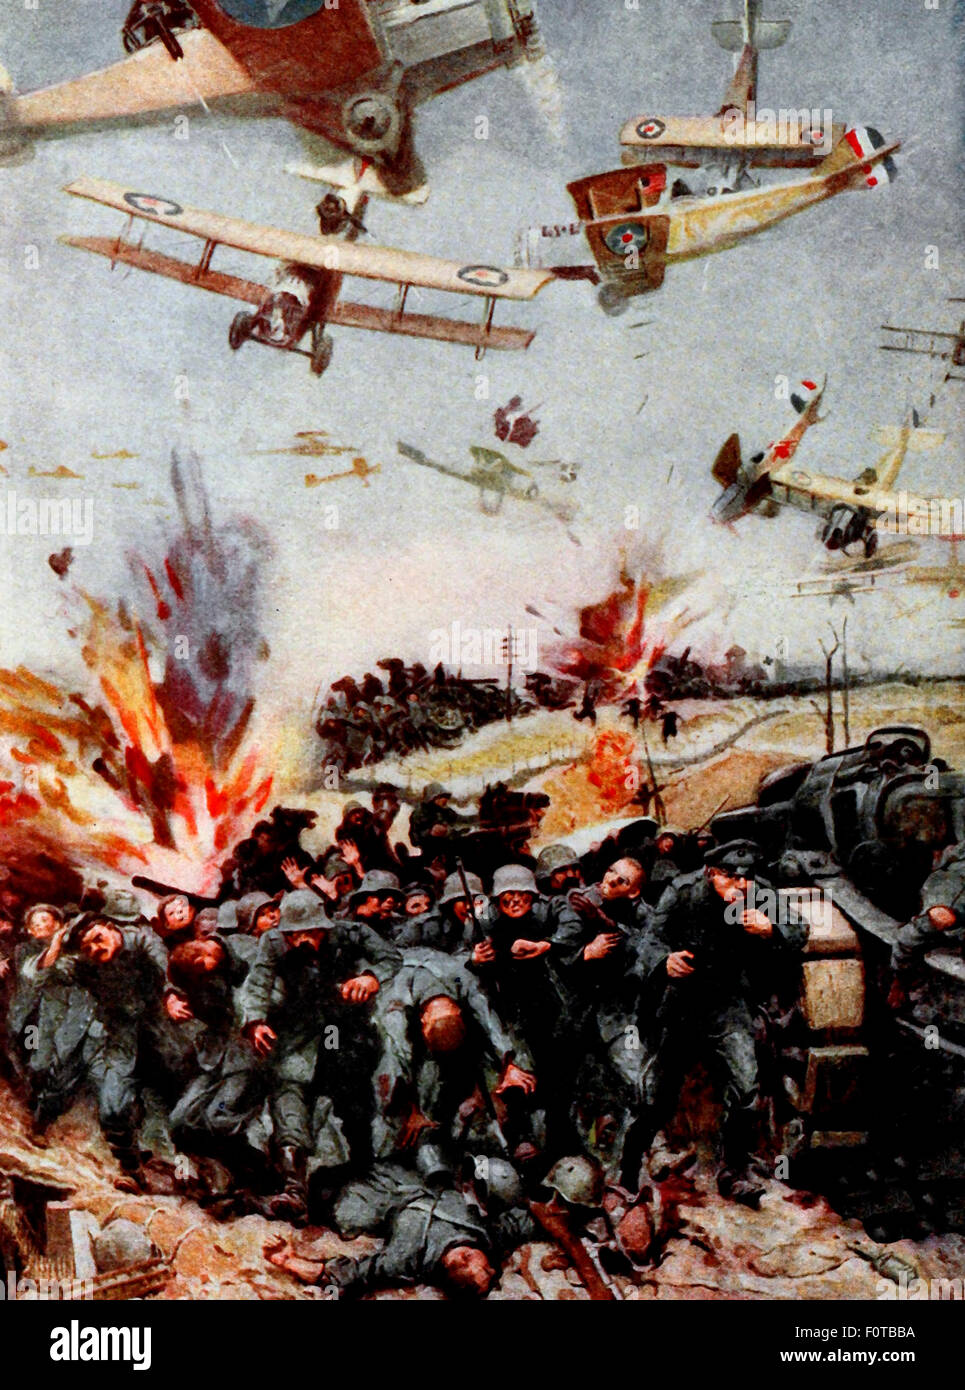 The 'Victorious Retreat' back to the Rhine - Huns struggling, not hopefully forward to Victory, but dejectedly backward to defeat, under bombing planes ceaselessly showering death upon them.  World War I Stock Photo